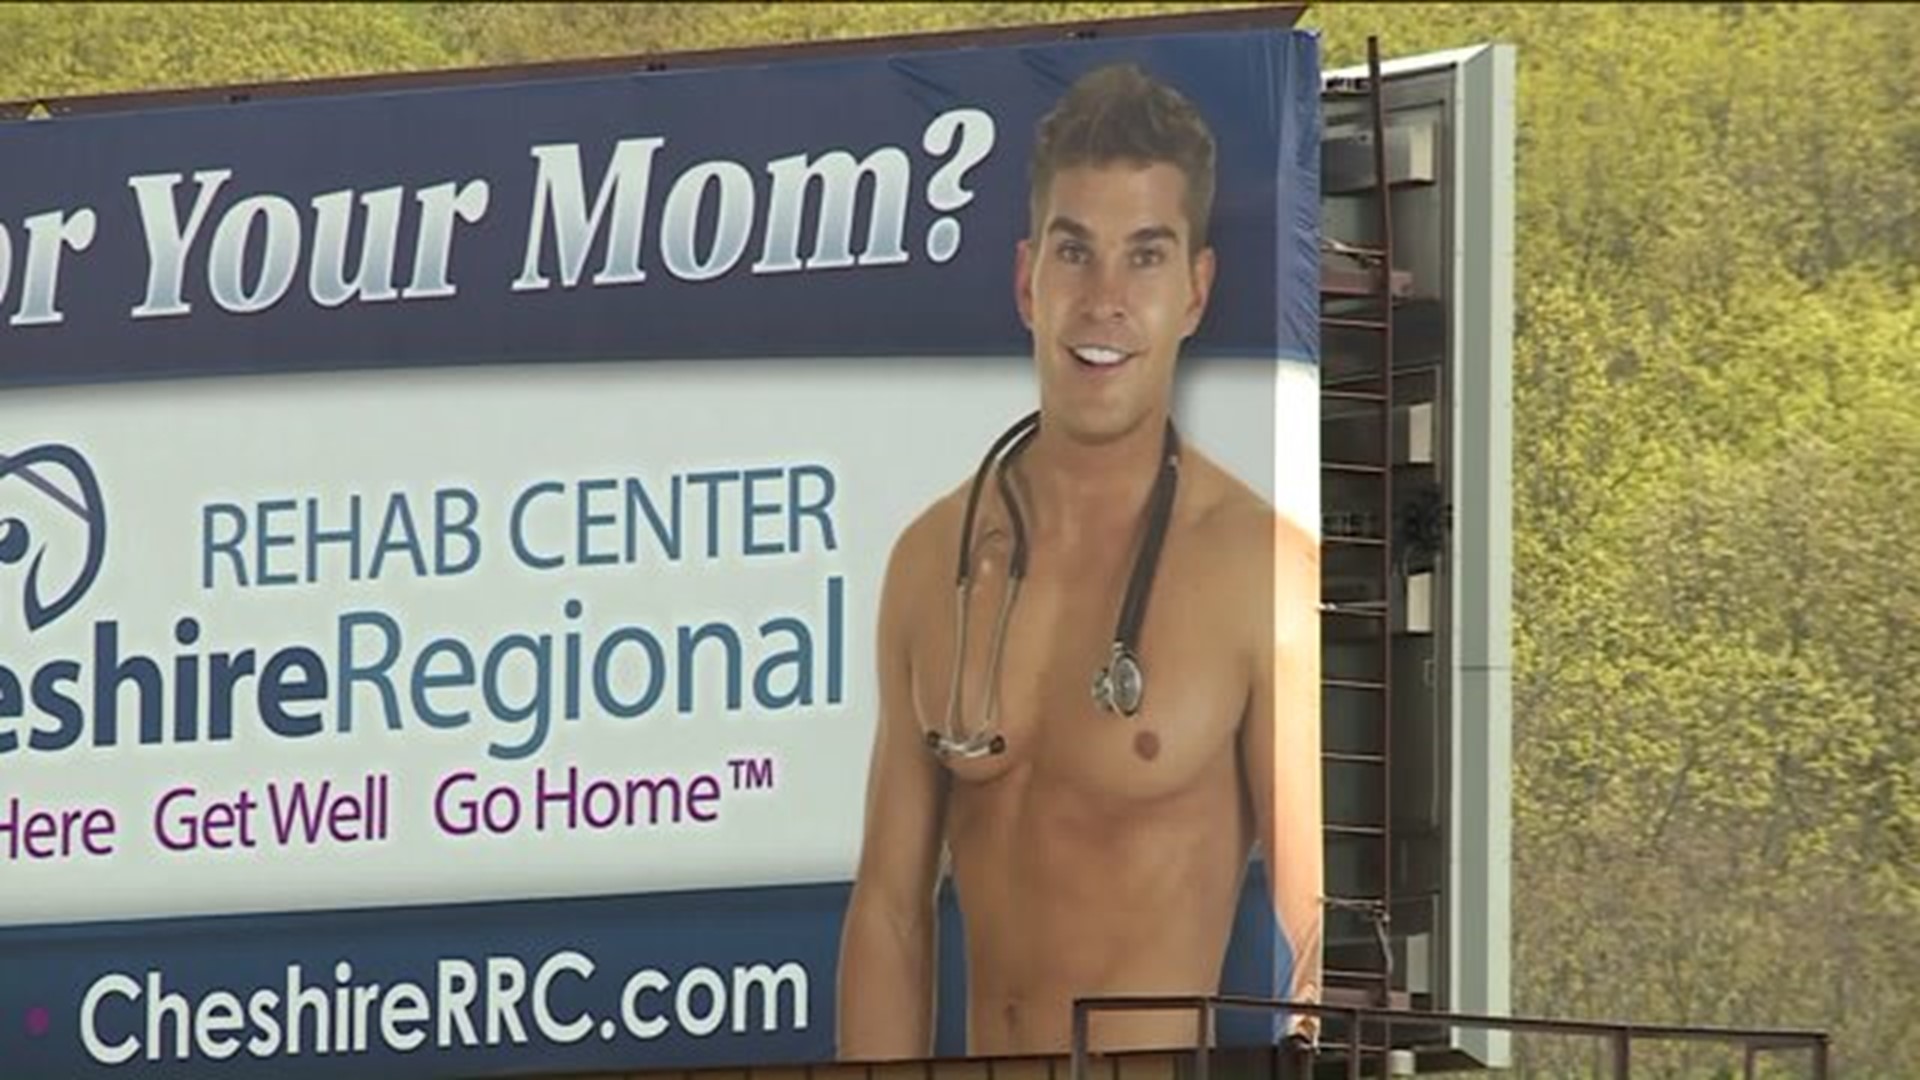 Medical center billboard causing controversy